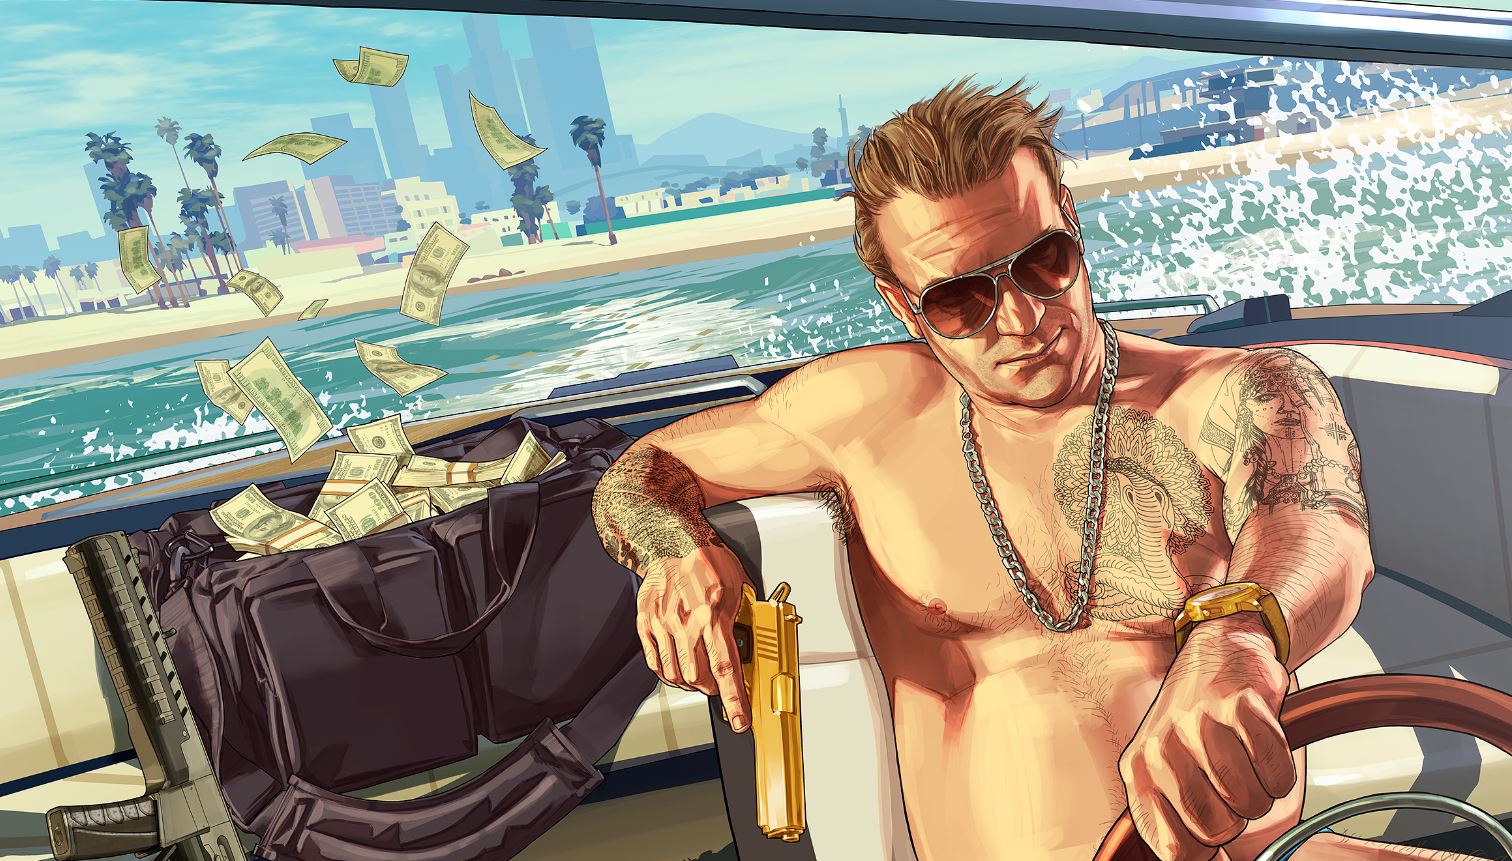 Grand Theft Auto 6 trailer: when it's coming and how to watch